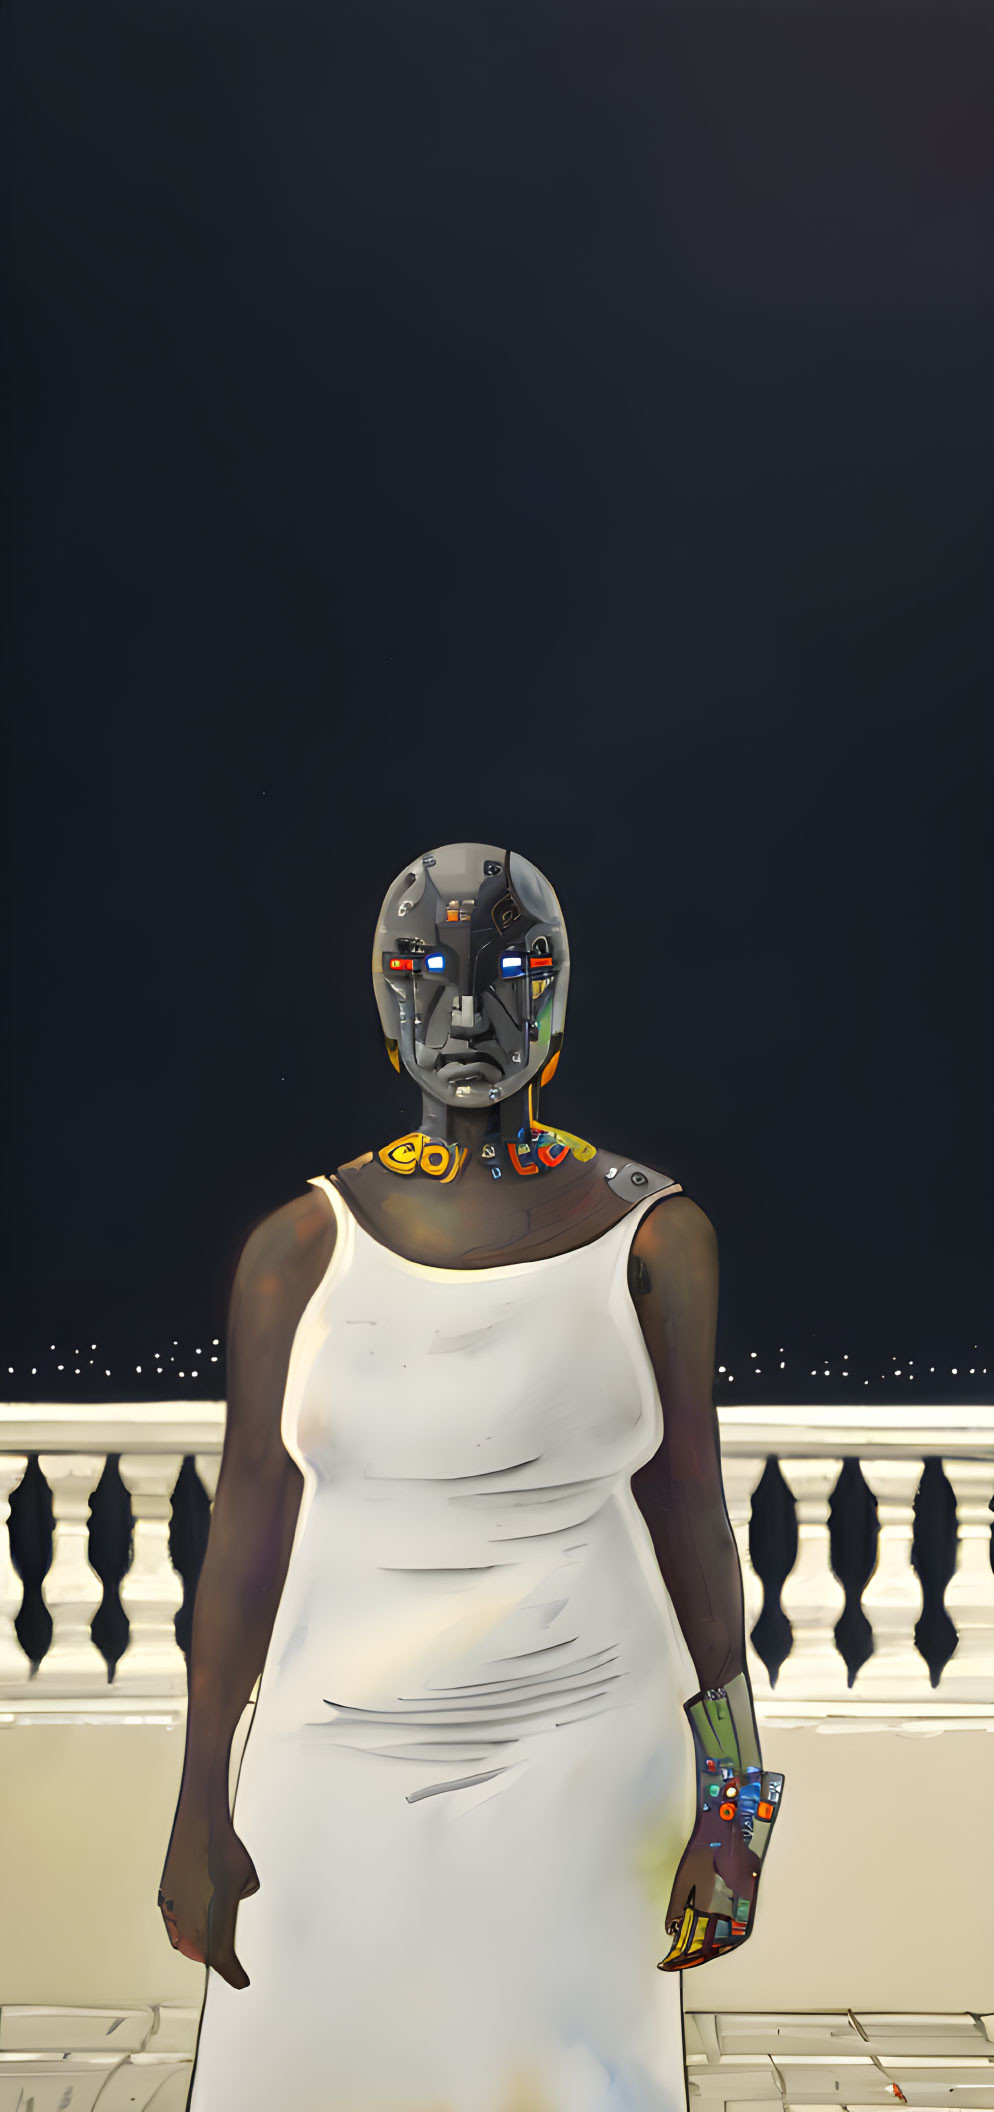 Humanoid robot with open head and circuitry, wearing white dress, against railing and dark sky.